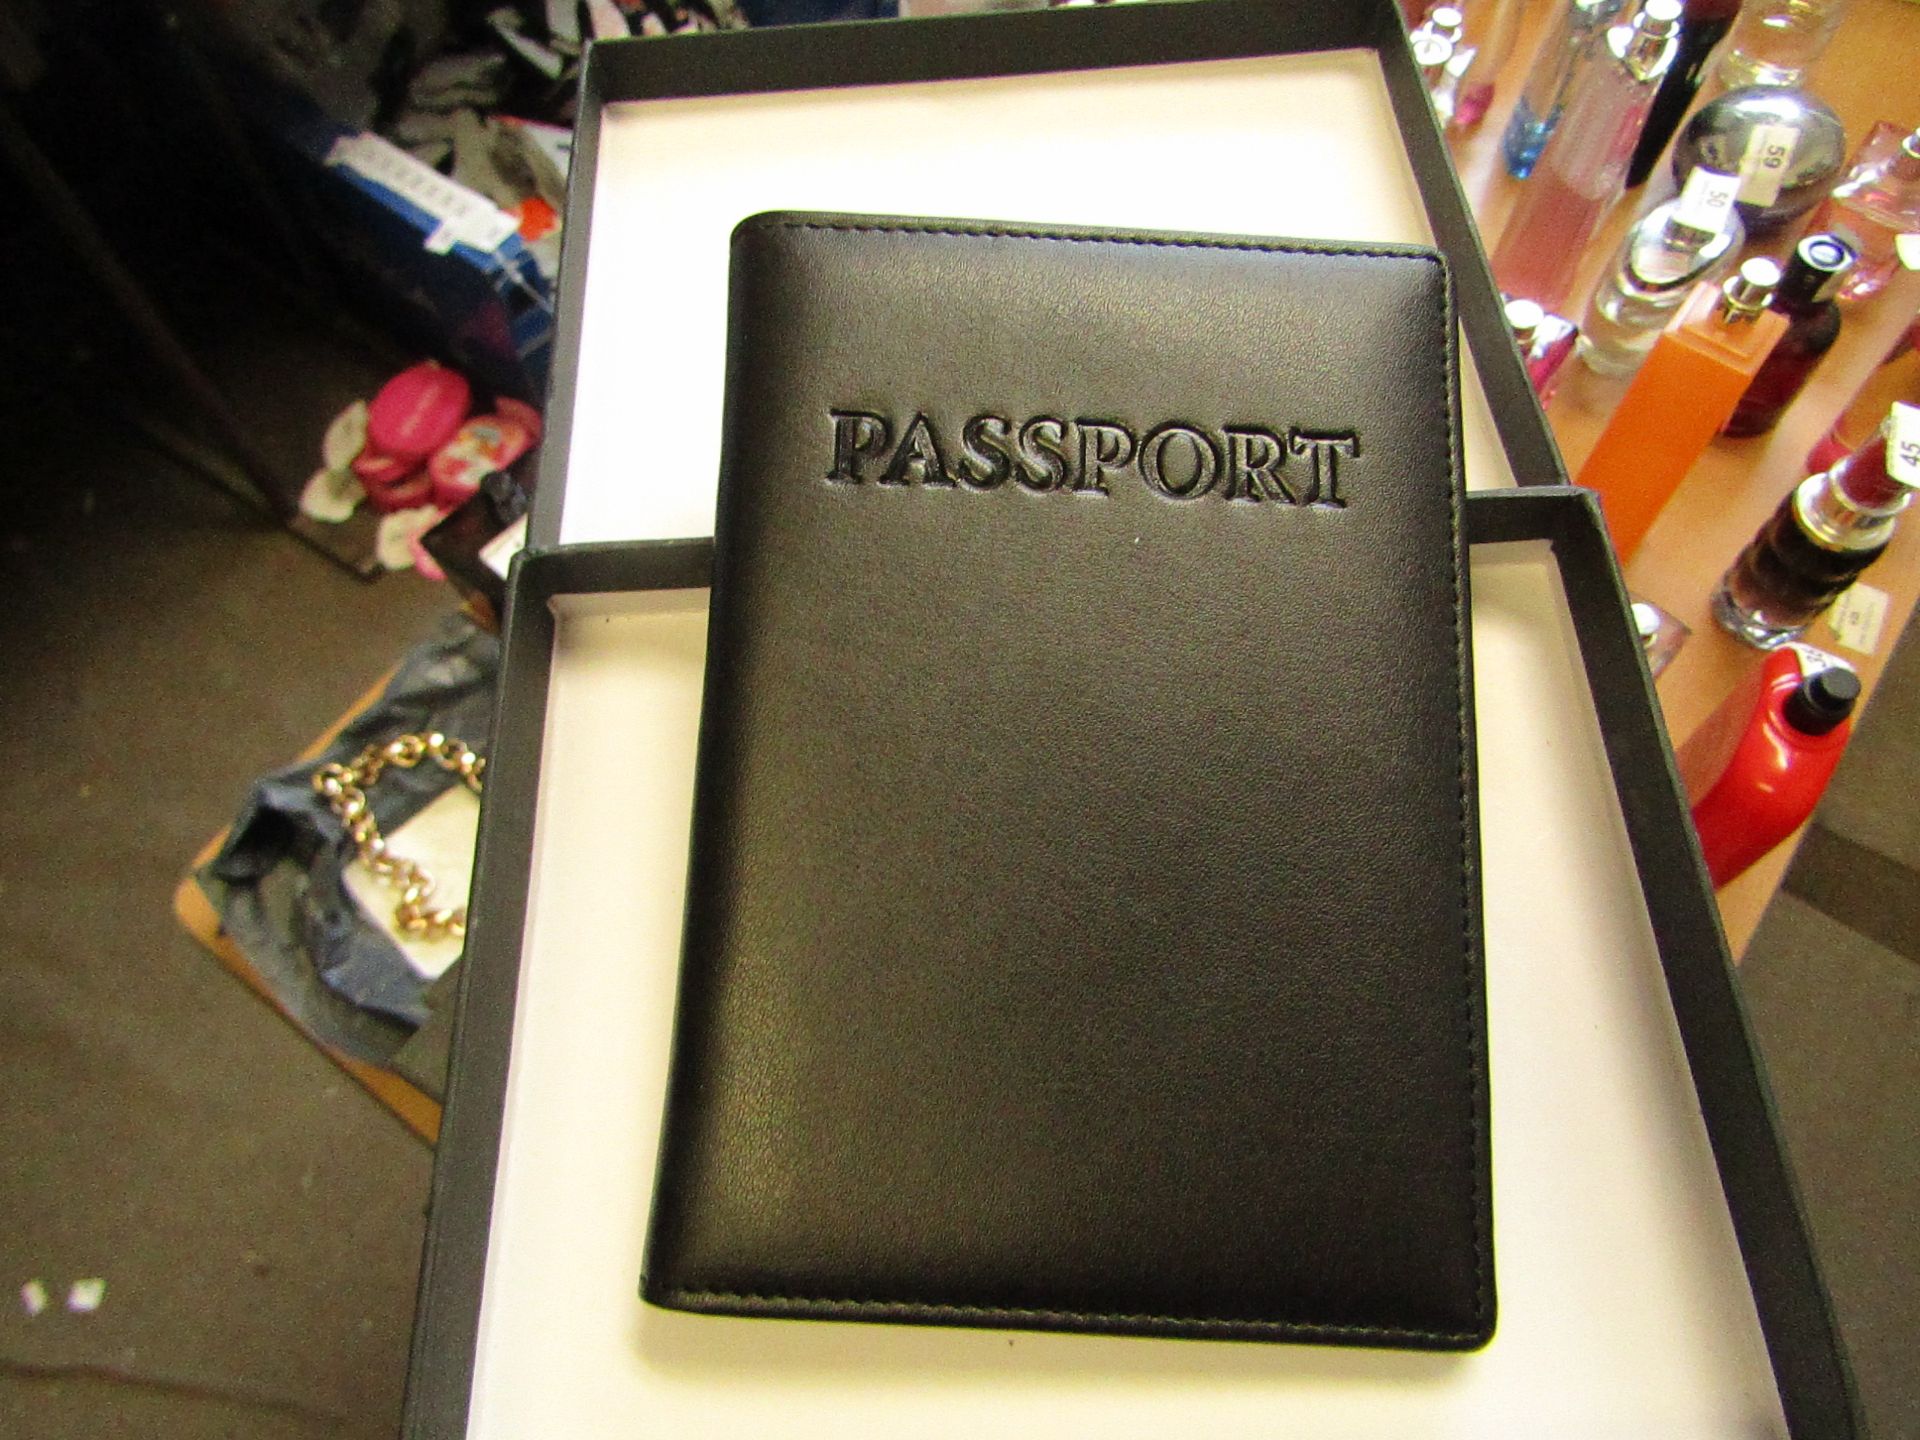 1 x Boca Brown Leather Passport Organiser with RFID Blocking to Prevent Card Cloning New & Boxed